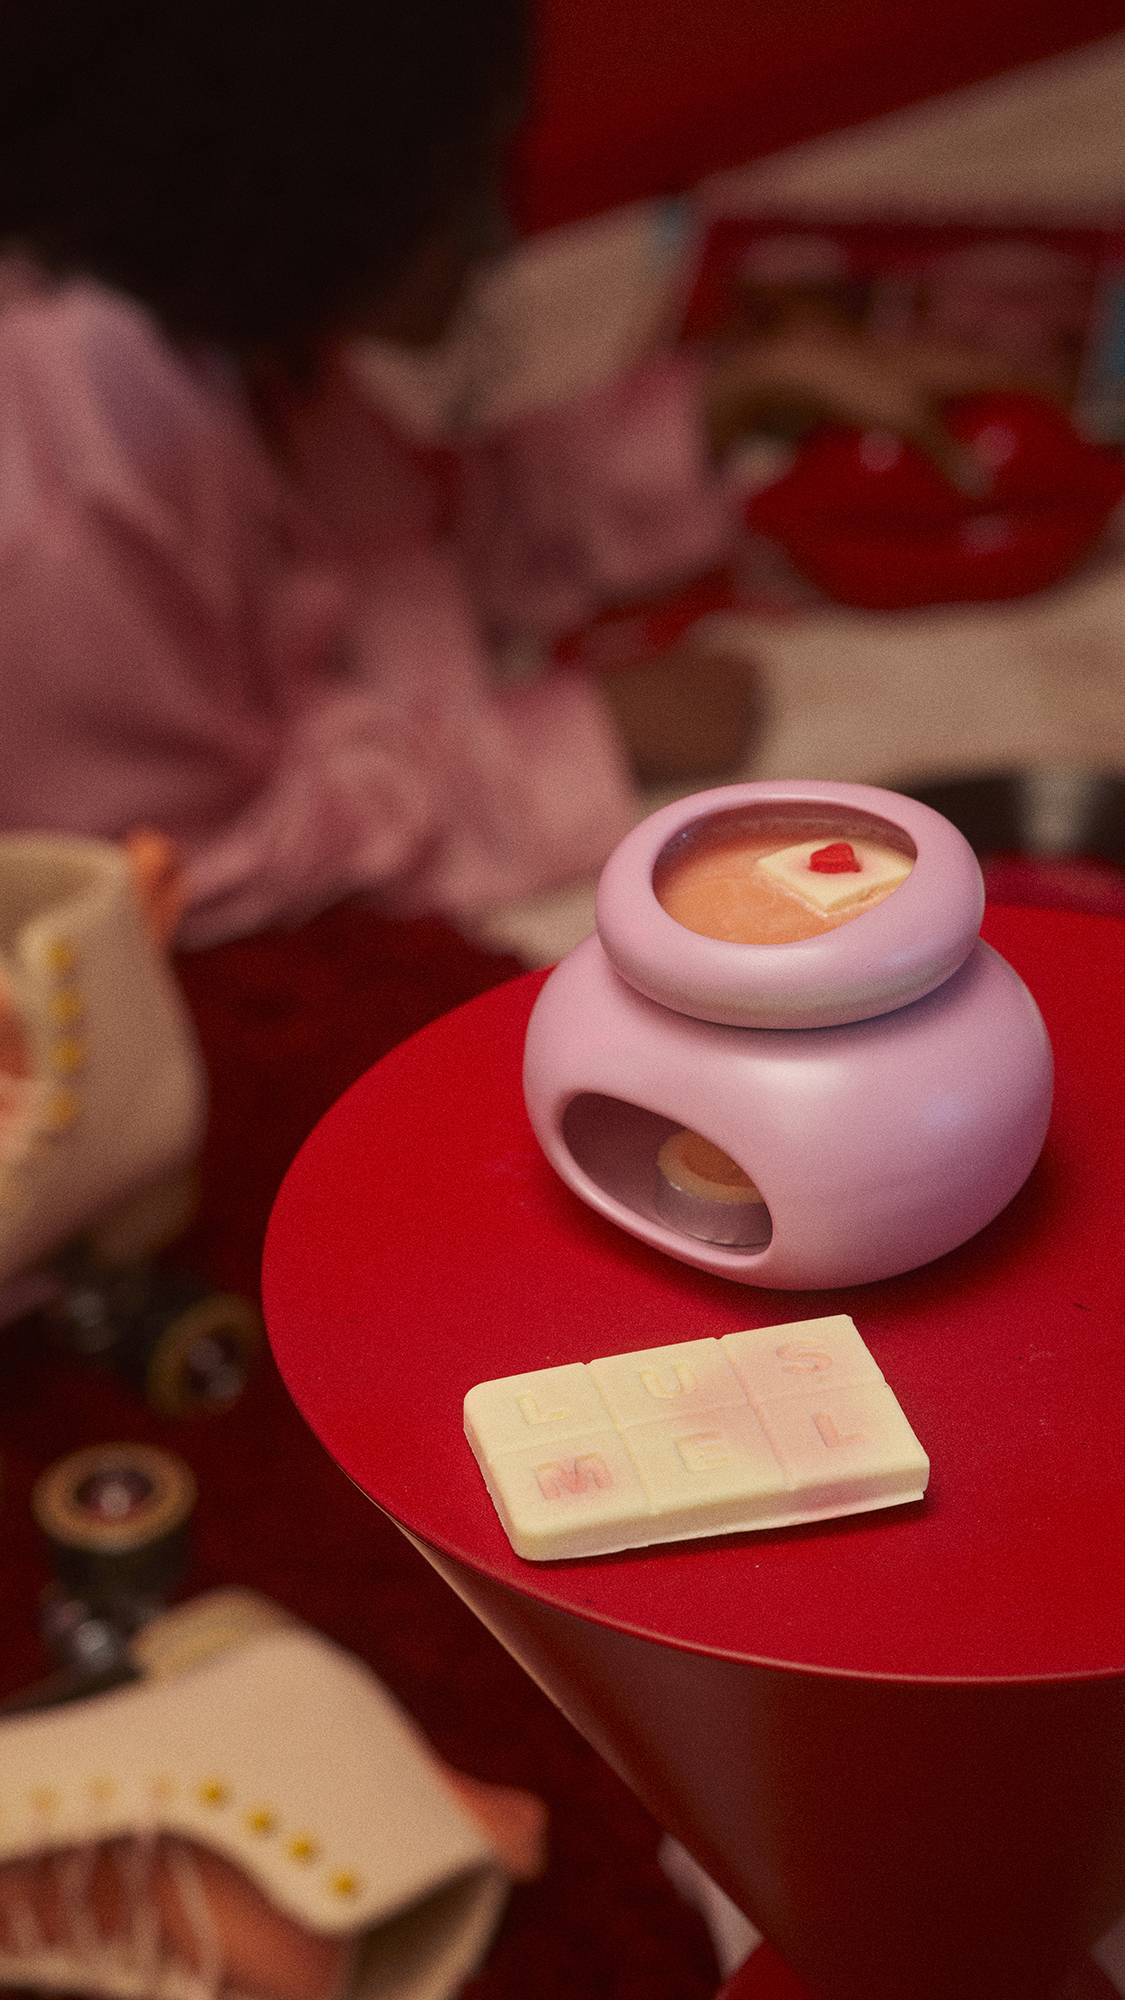 The Queen of Hearts product is melting in a pink wax burner on a red table. There are some roller skates just out of focus to the side. 